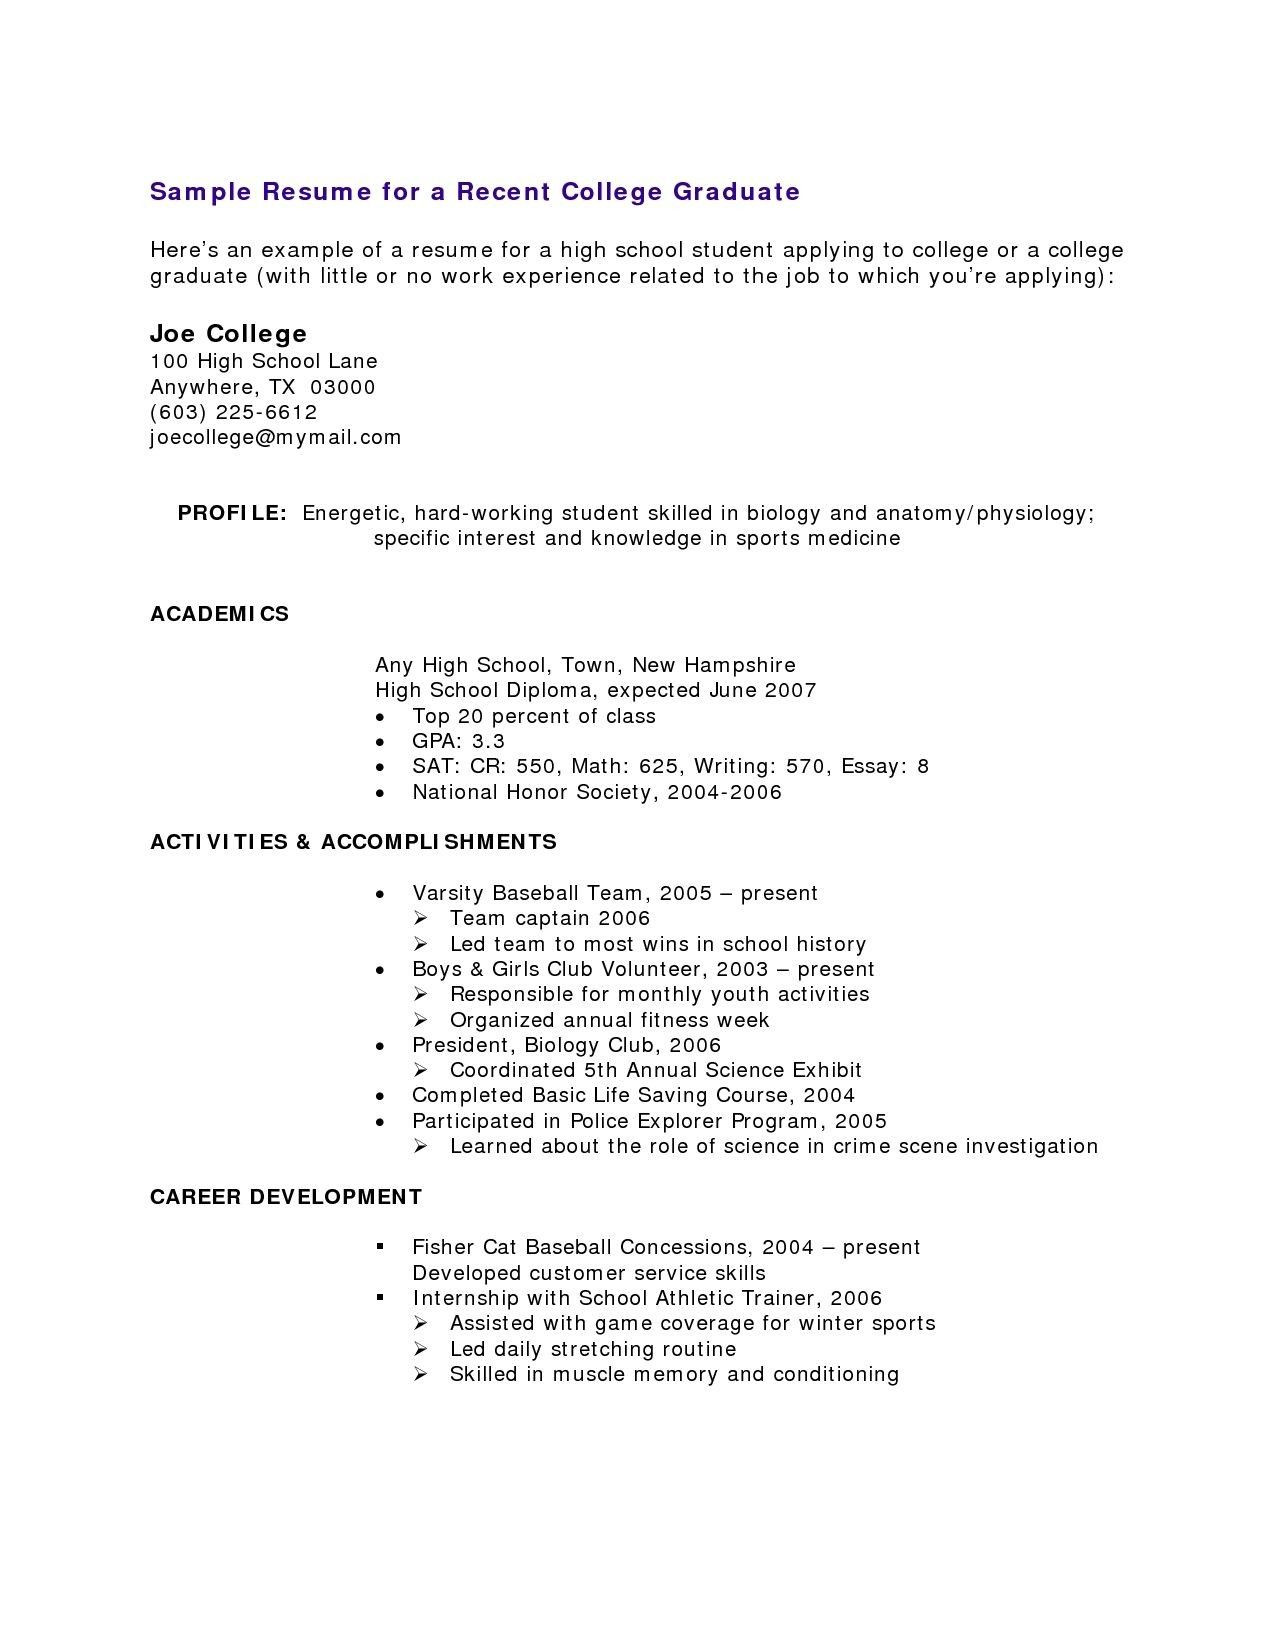 Sample Resume for Highschool Students without Work Experience High School Student Resume with No Work Experience Resume High …